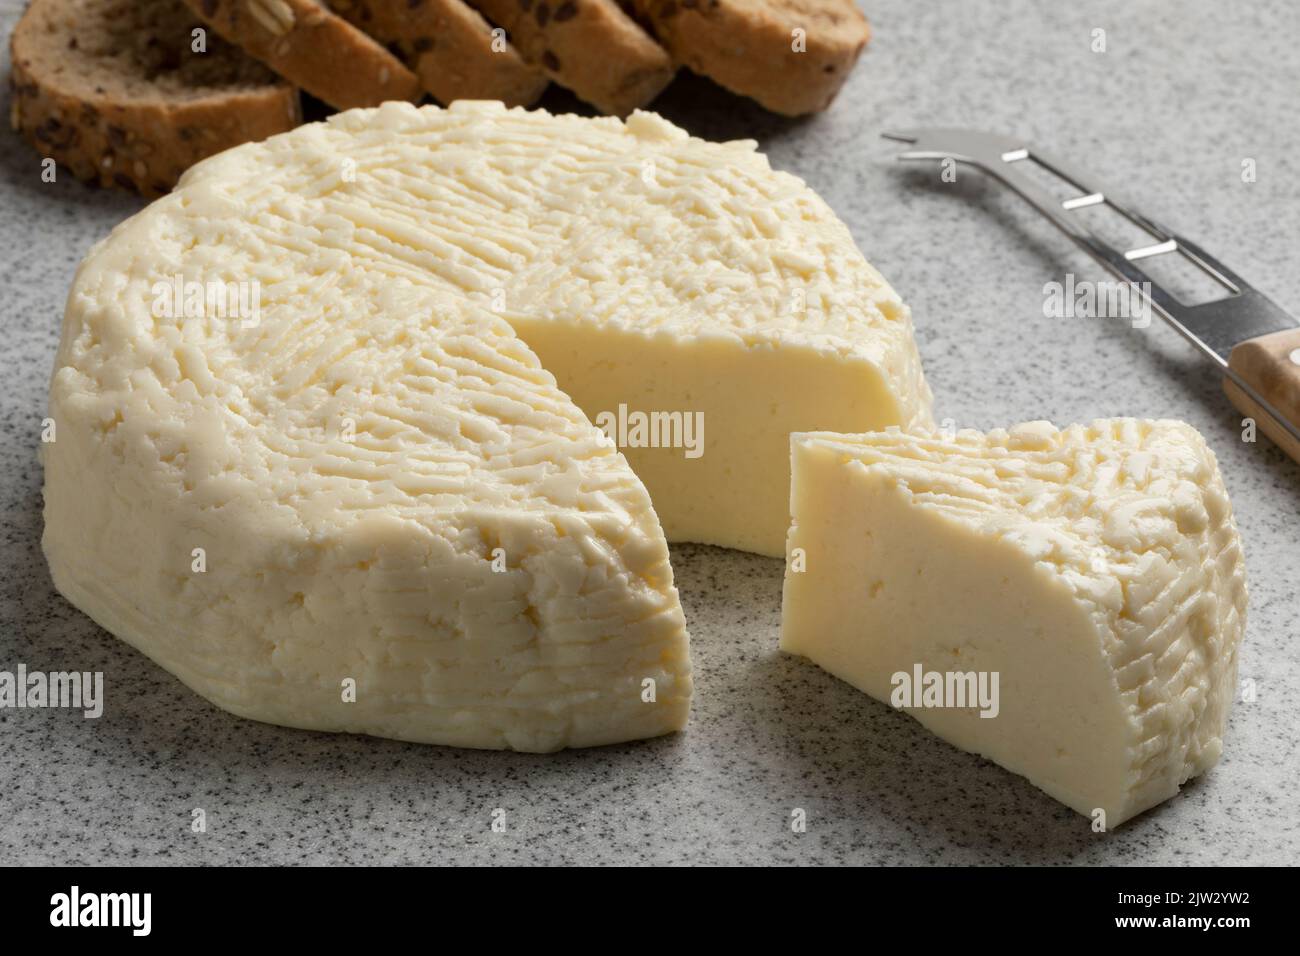 Piece of traditional Croatian homemade white cheese of cooked milk, Kuhani sirevi, on a cutting board close up Stock Photo